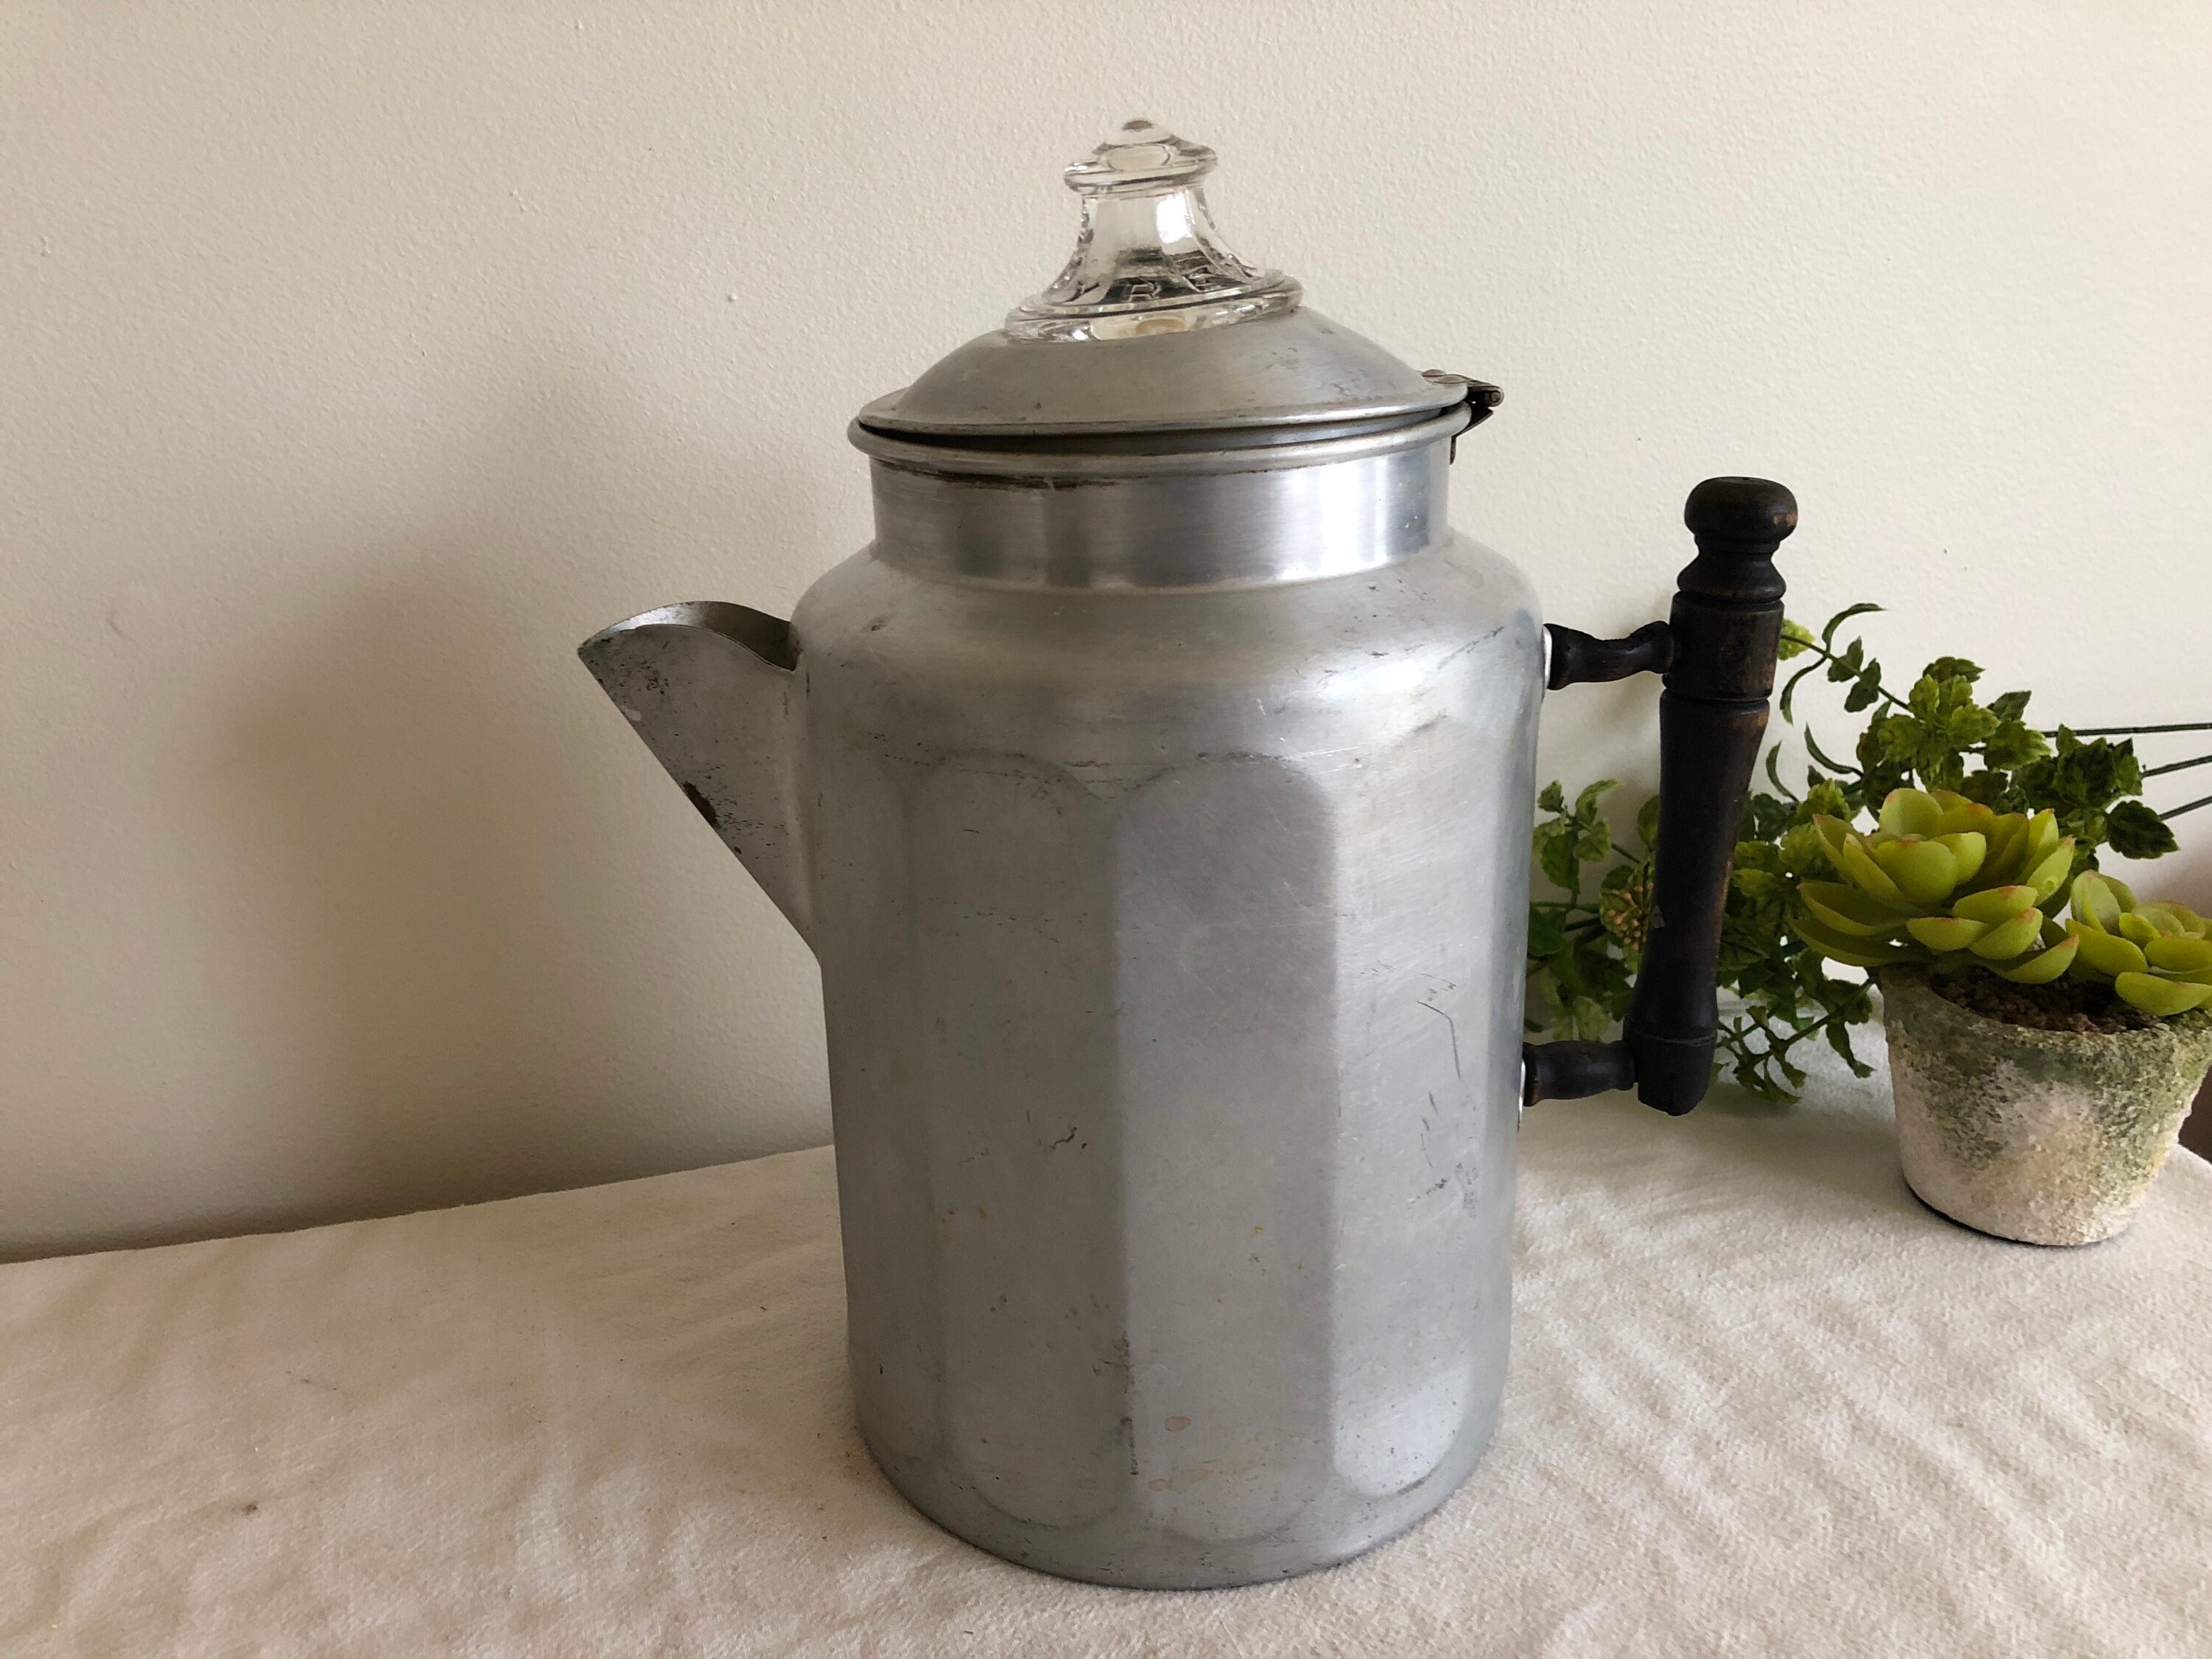 Vintage Continental Aluminum Coffee Pot by West Bend, Percolator